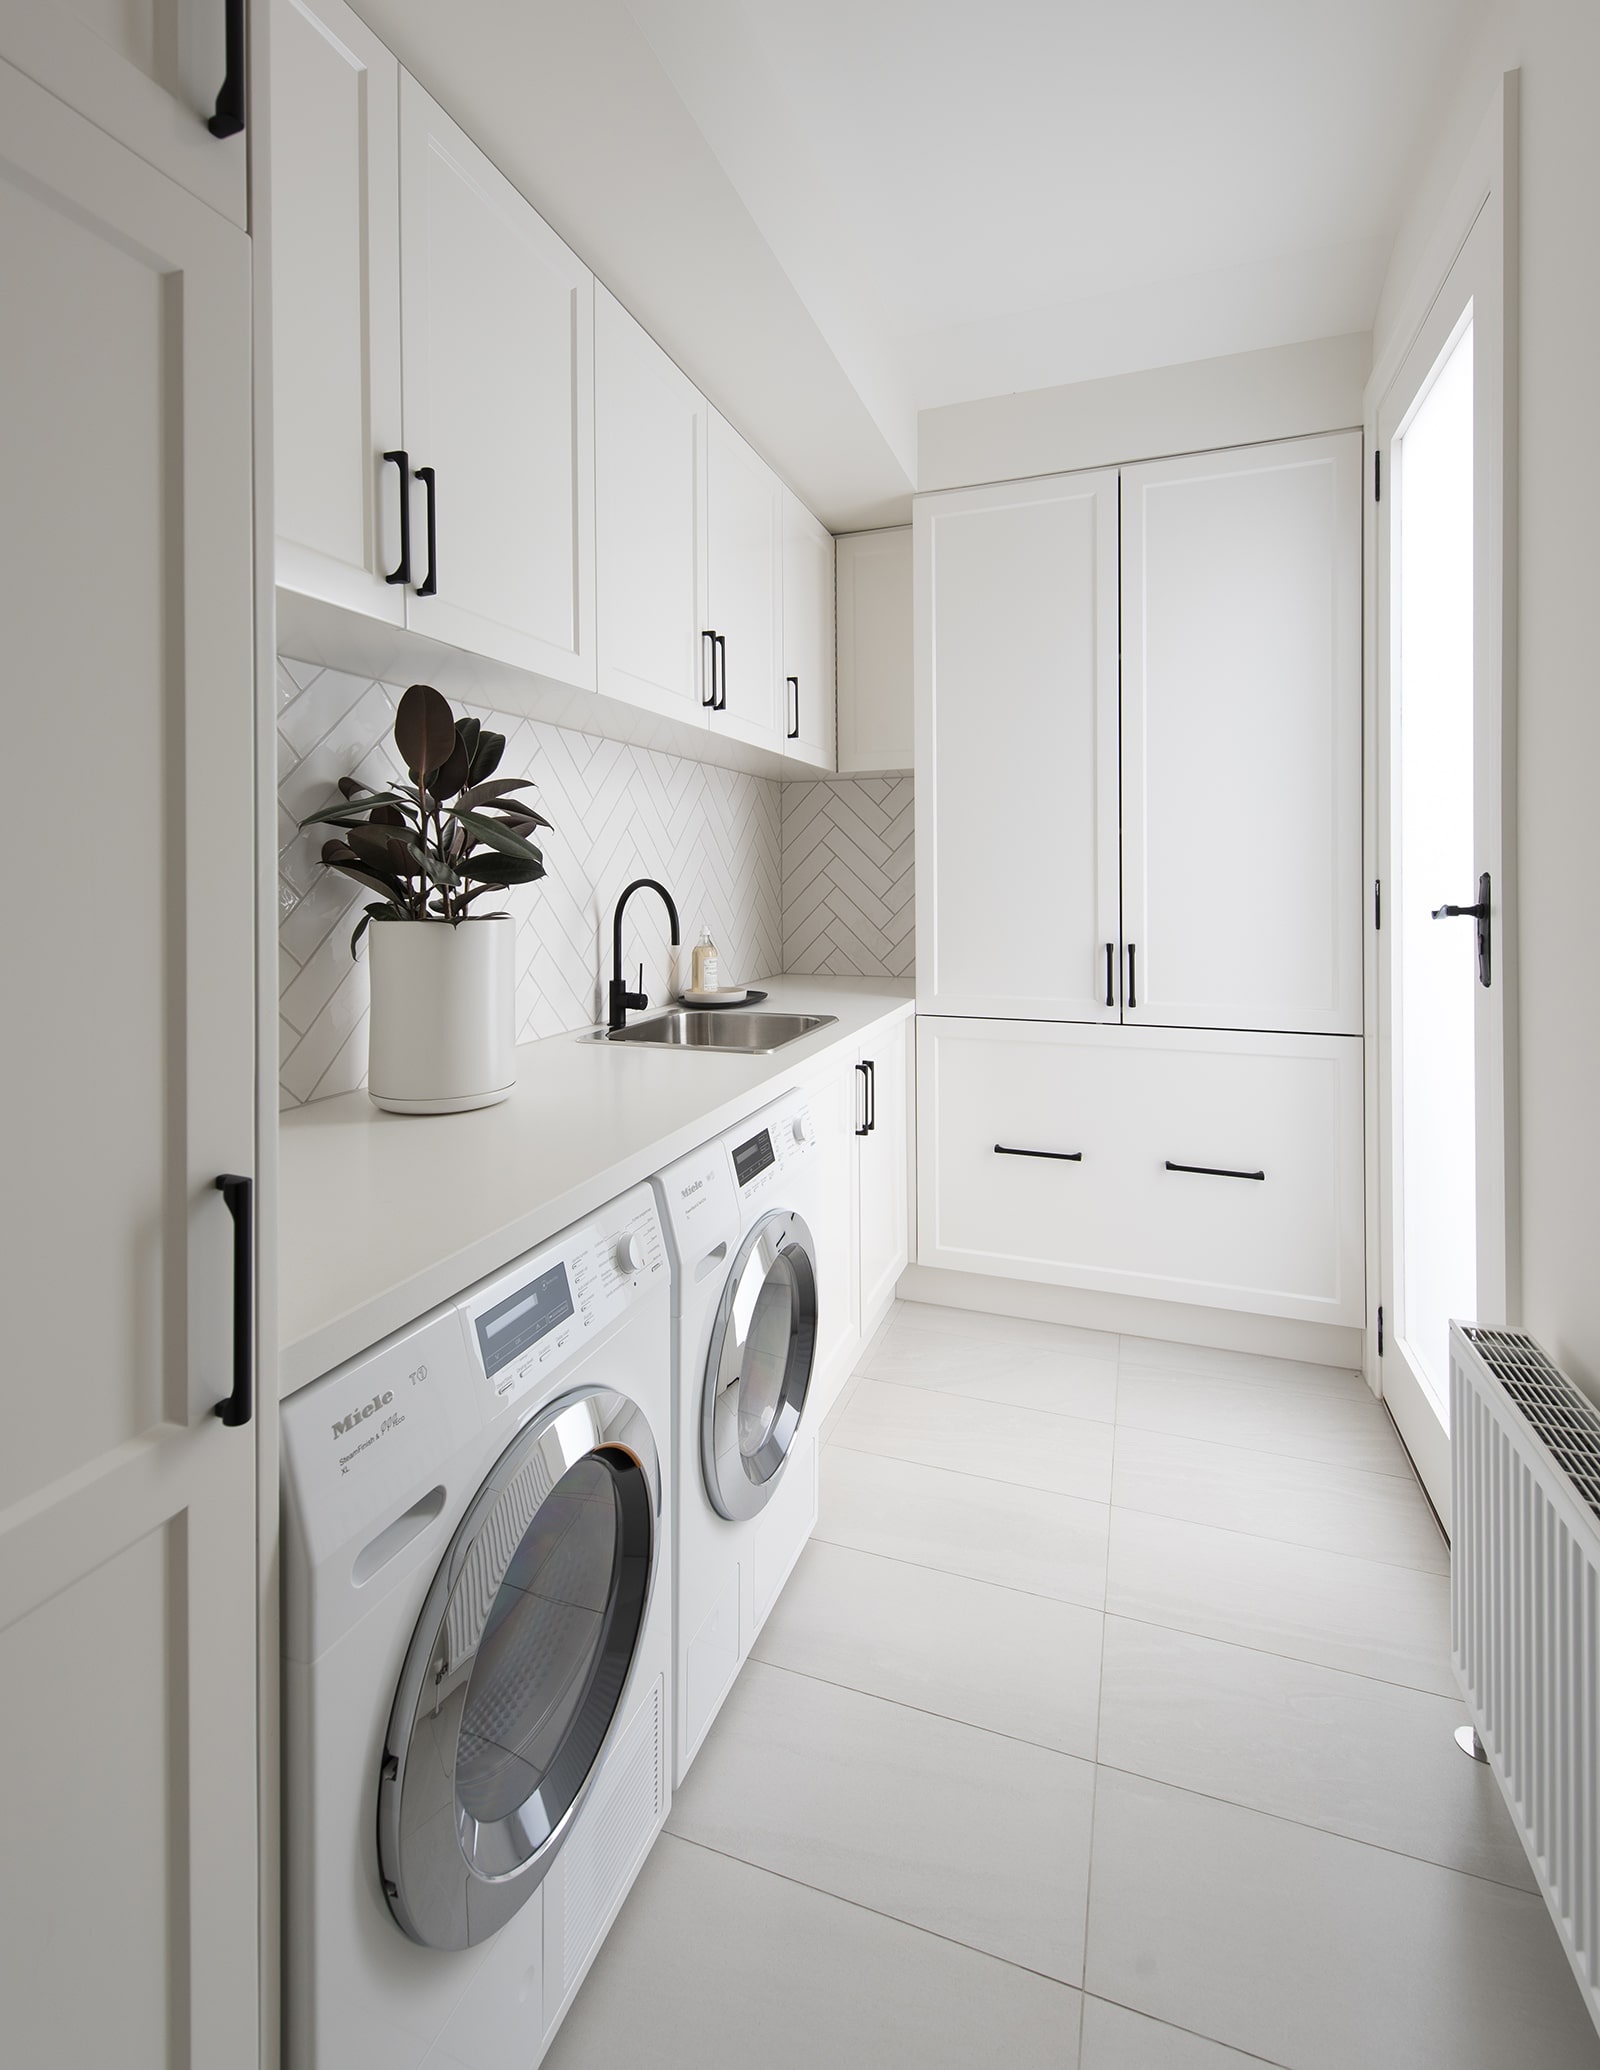 The Top 10 Laundry Rooms of 2021